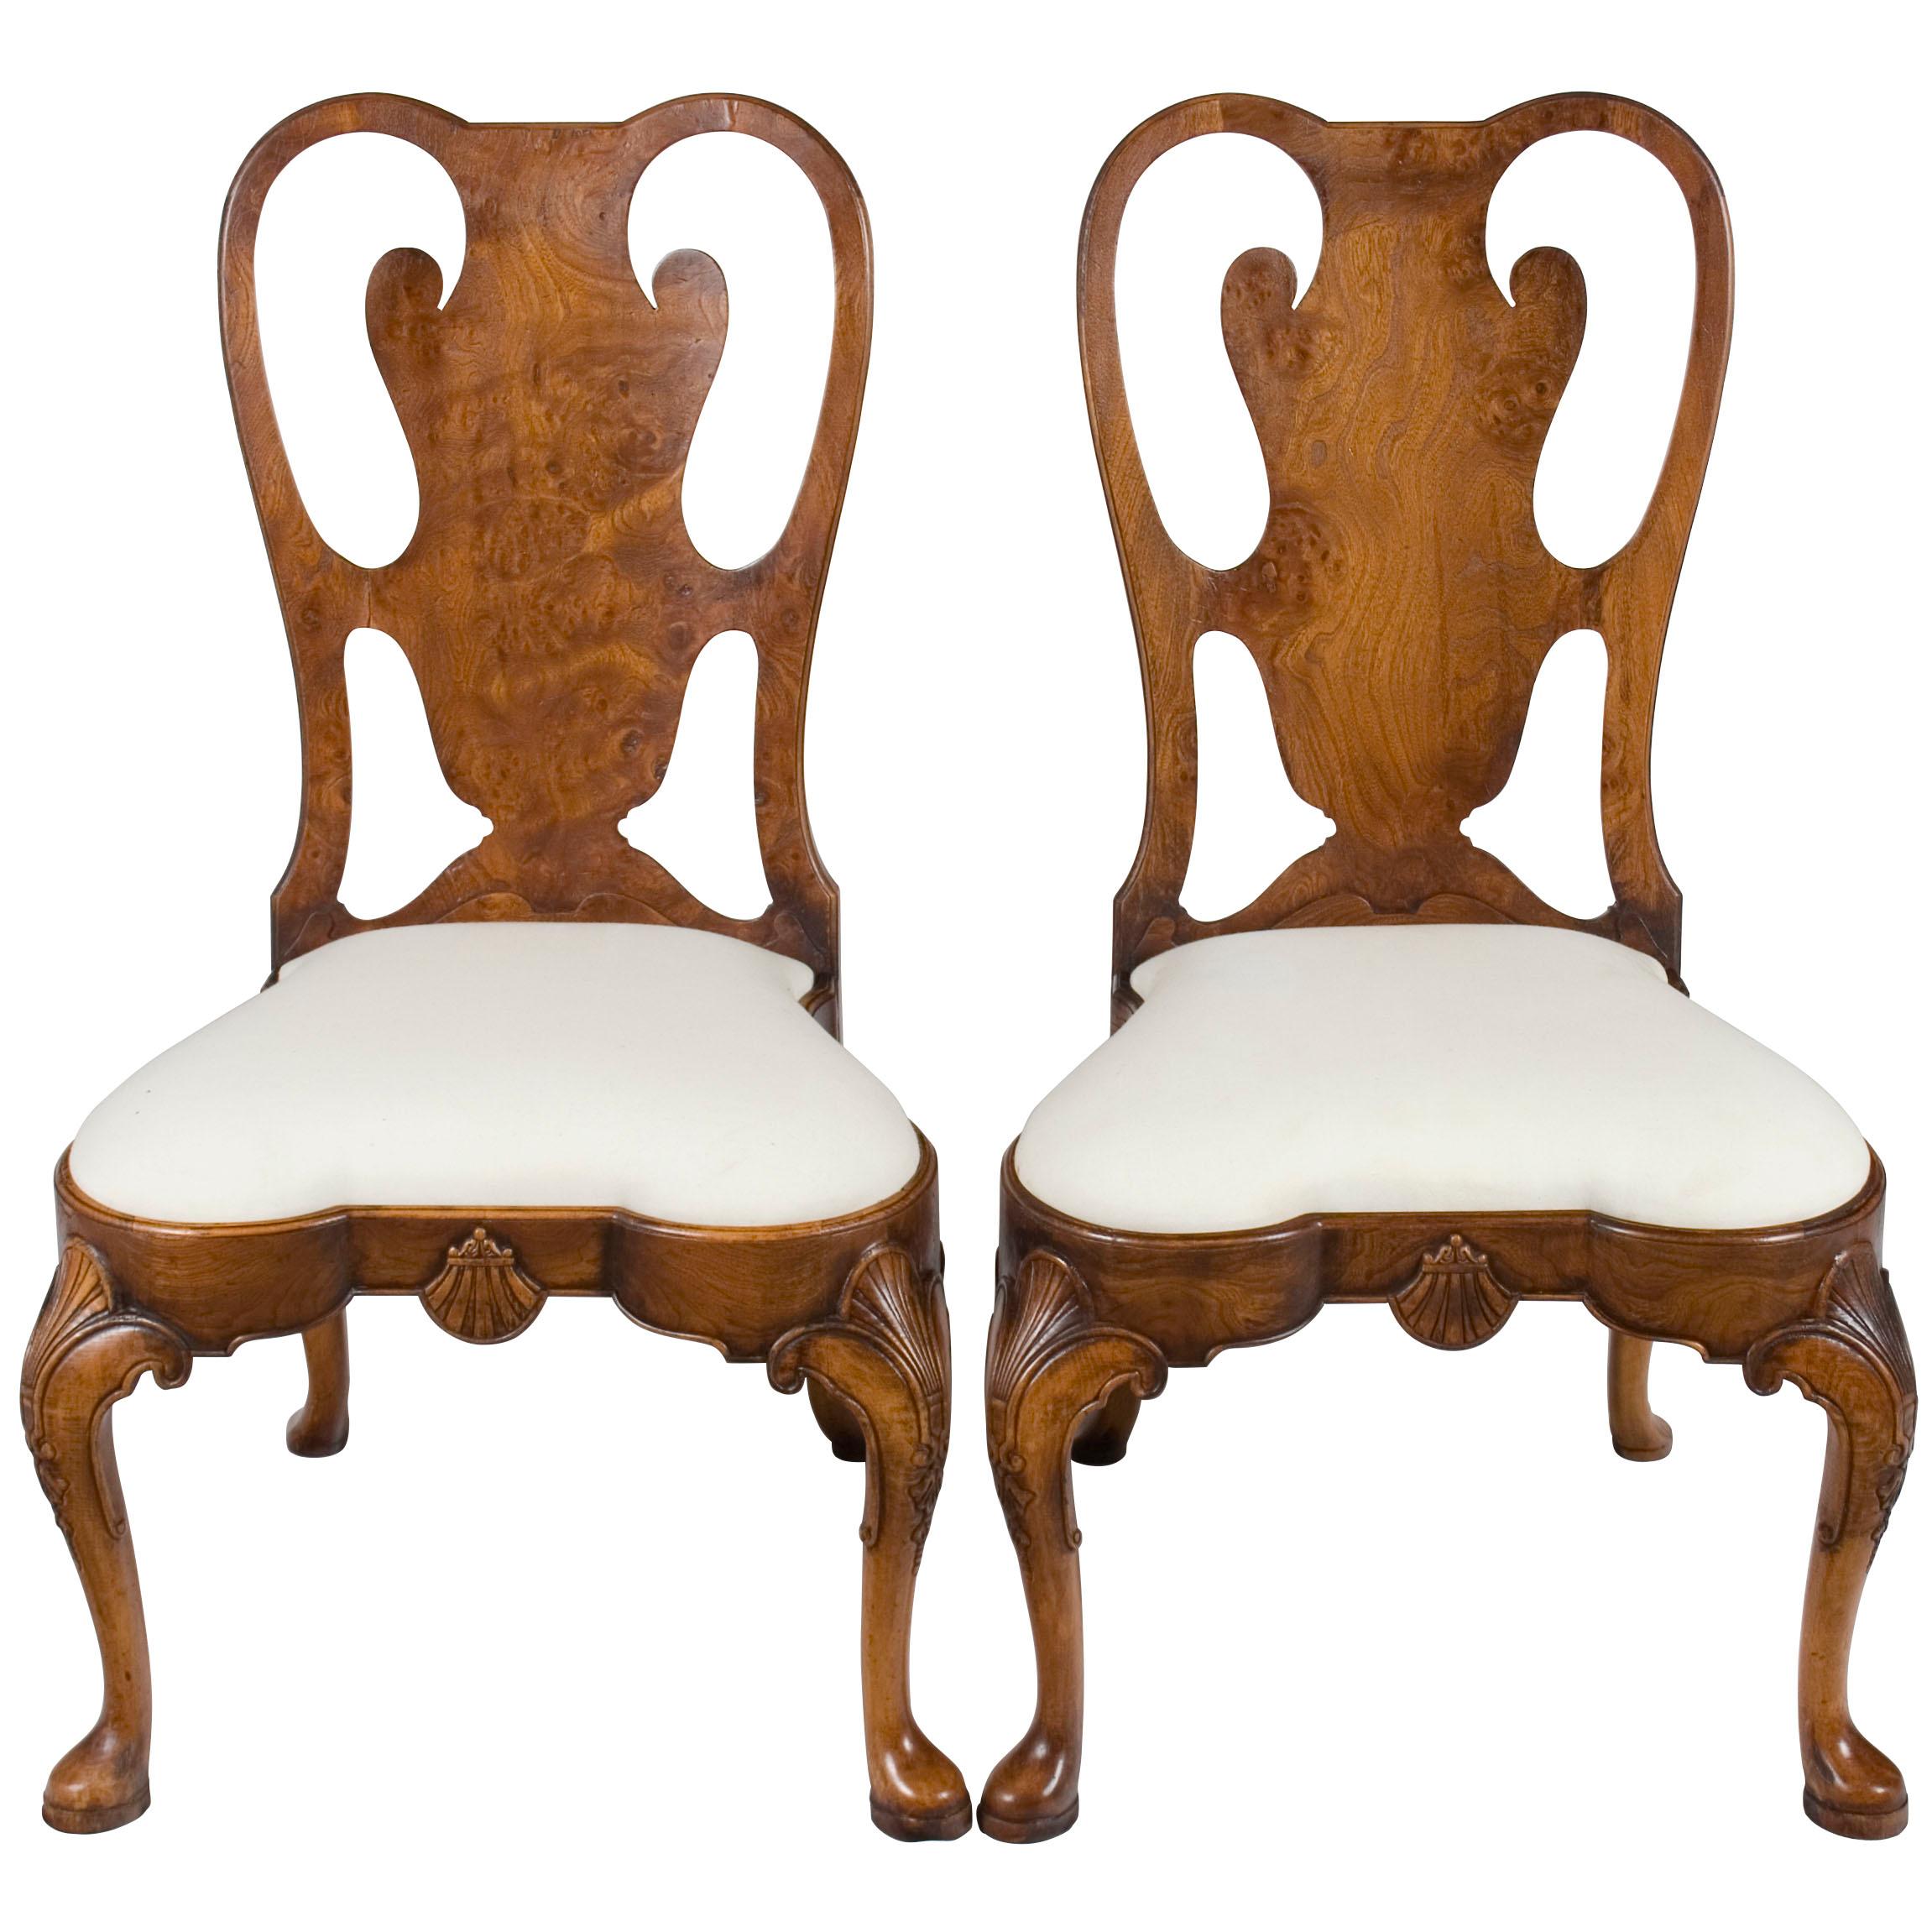 Pair of Carved Burl Walnut Queen Anne Style Dining Room Chairs im Angebot